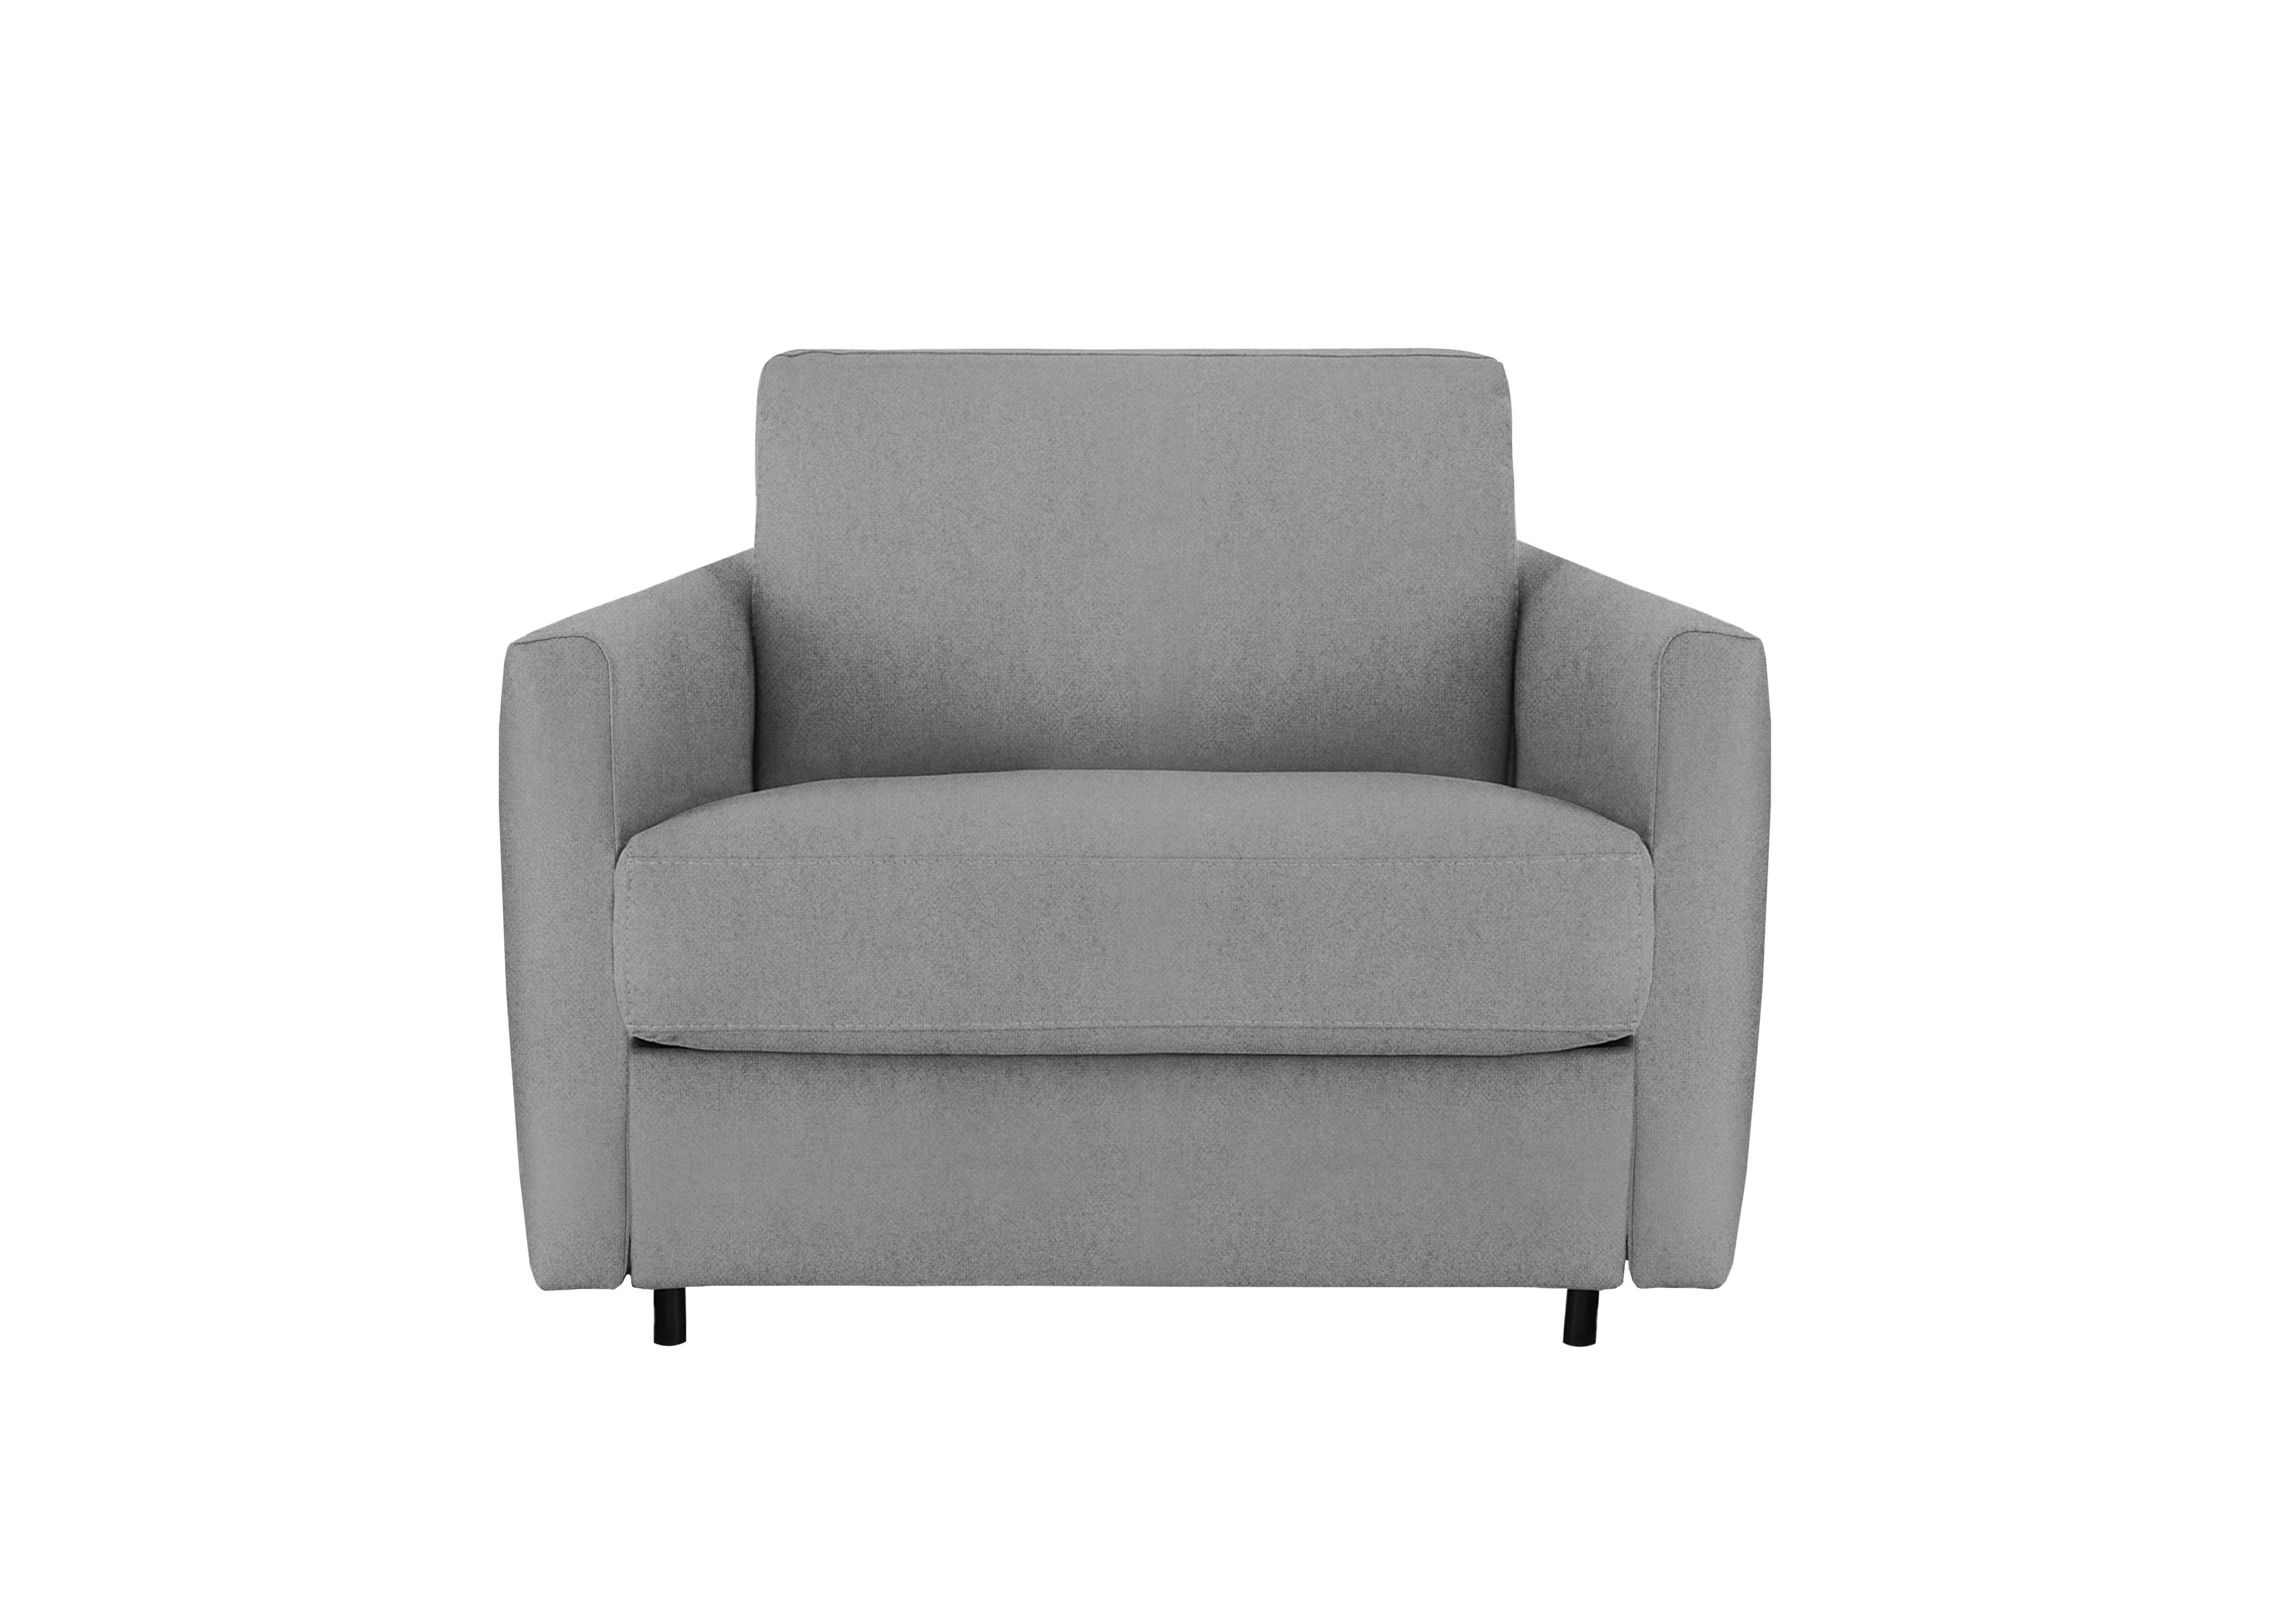 Alcova Fabric Chair Sofa Bed with Slim Arms in Fuente Ash on Furniture Village